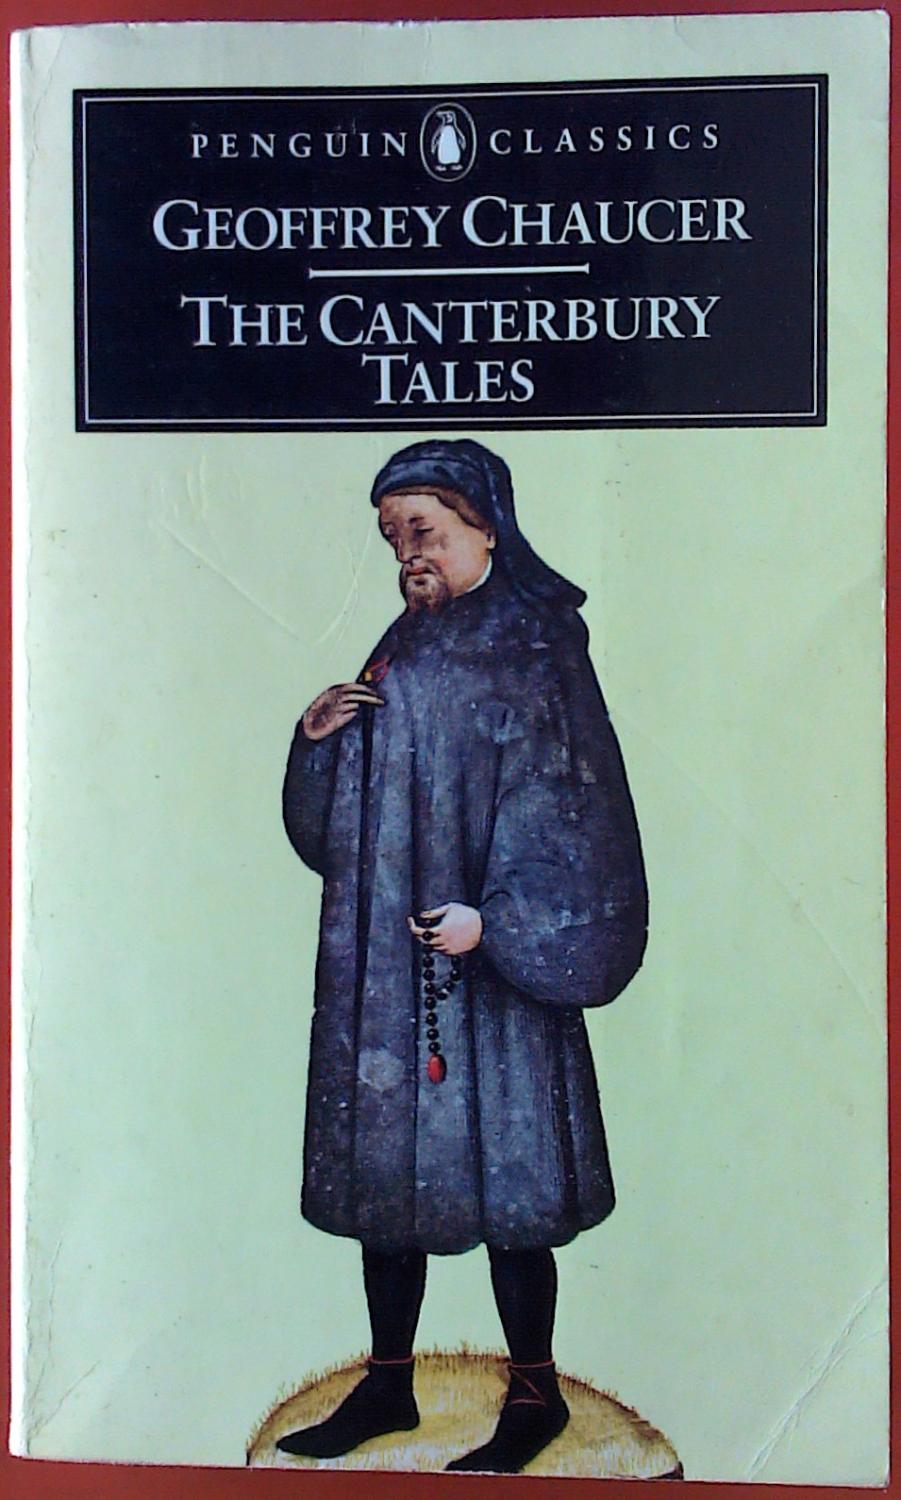 THE CANTERBURY TALES, TRANSLATED INTO MODERN ENGLISH BY NEVILL COGHILL - Geoffrey Chaucer